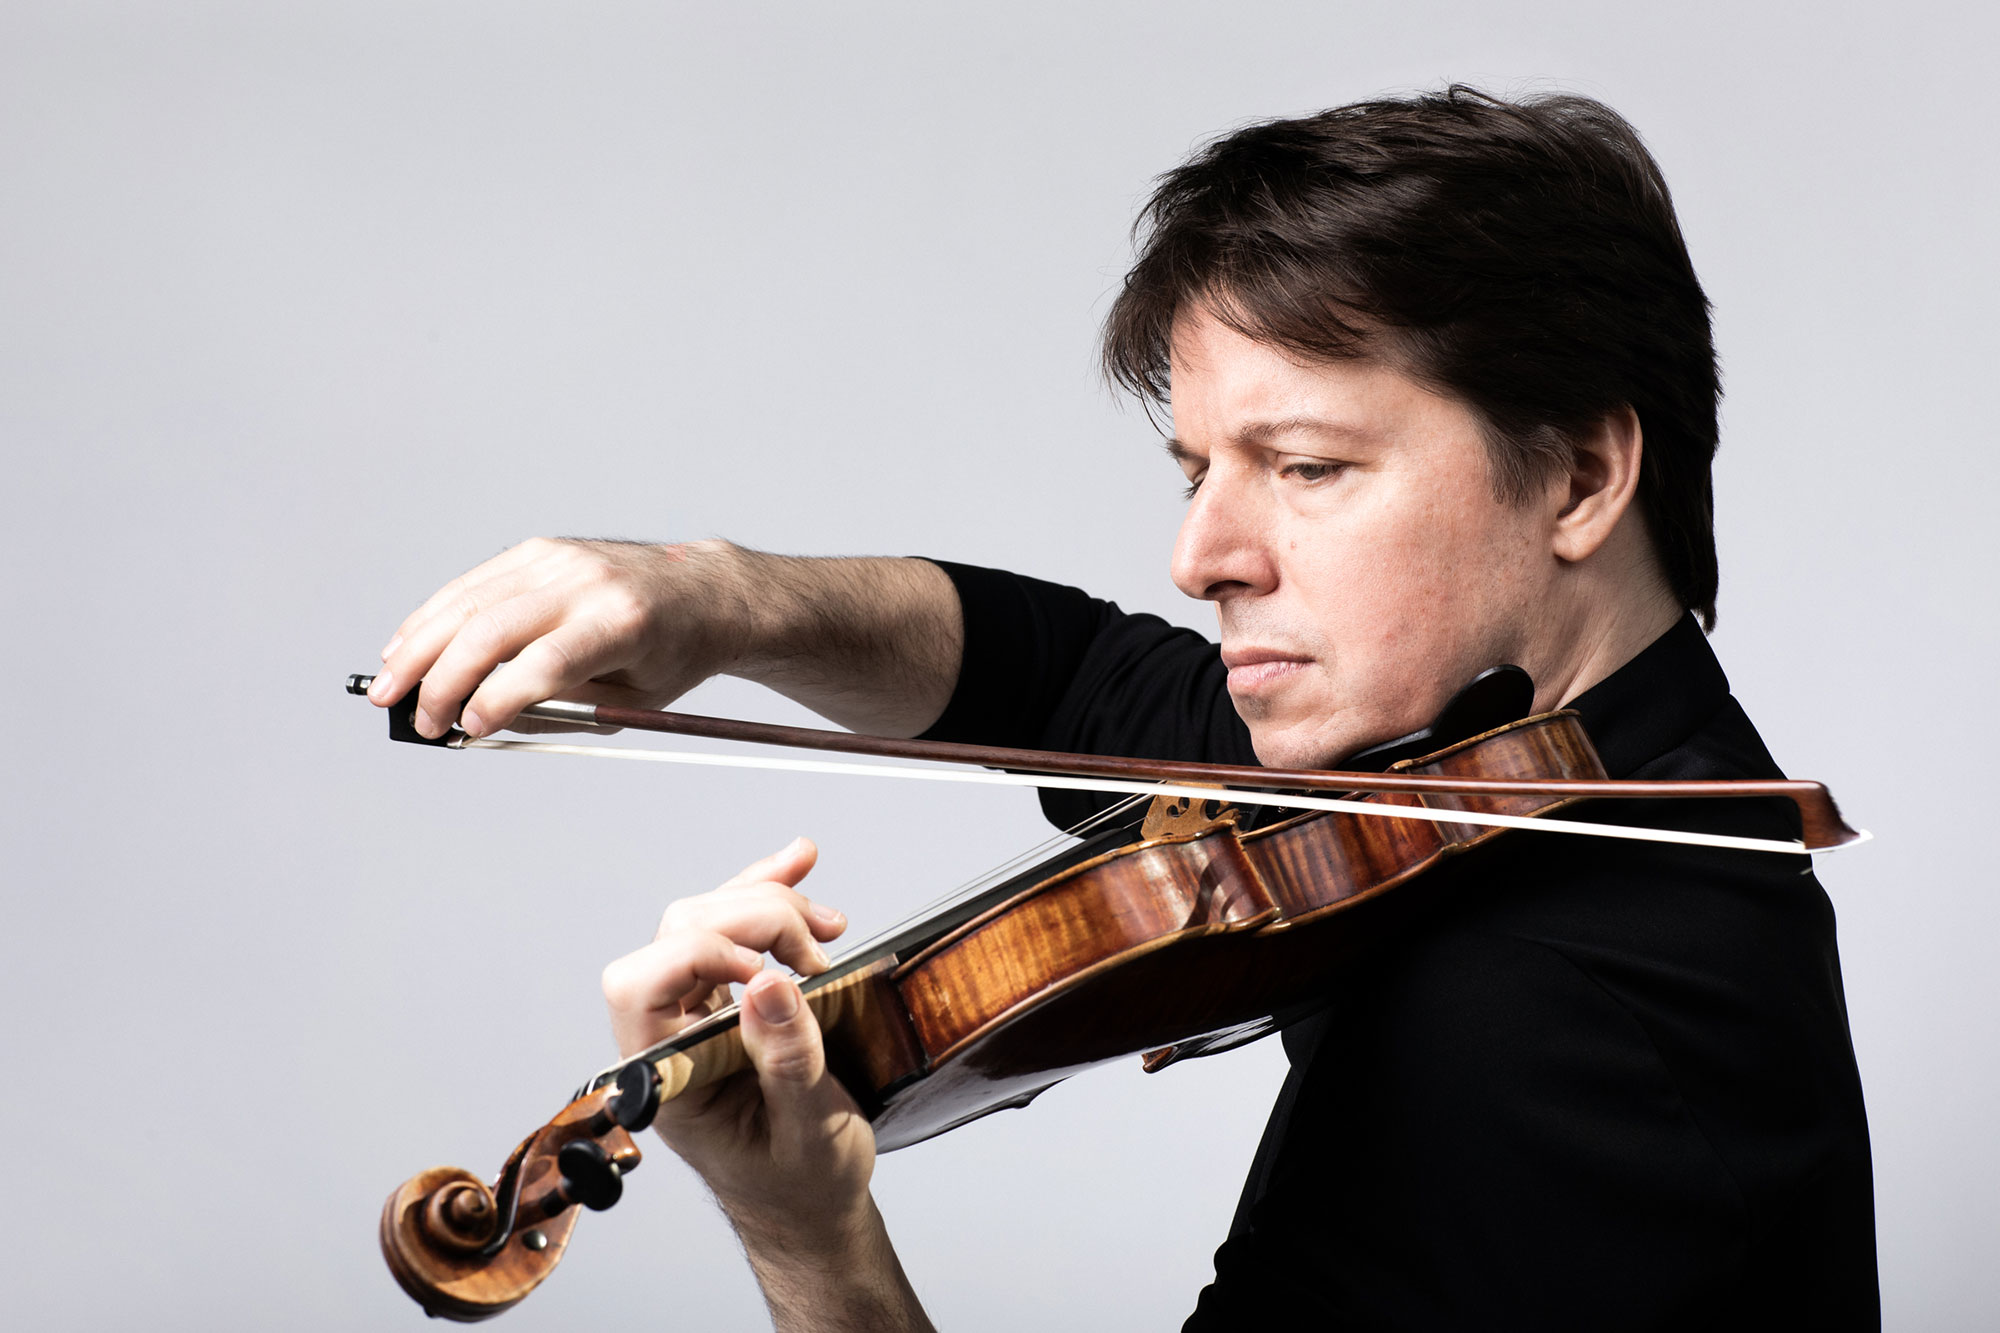 A Professional playing a Contemporary Violin